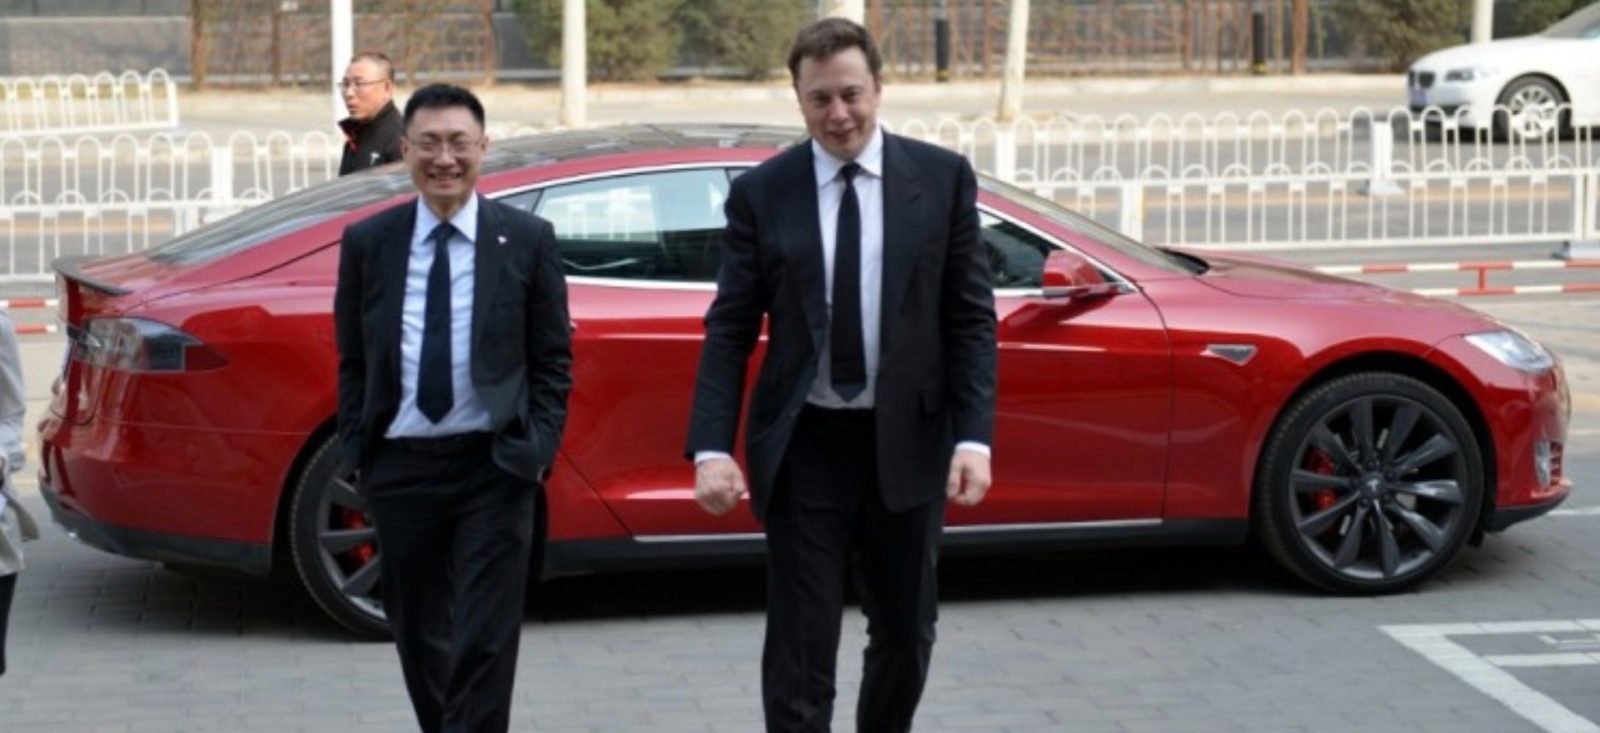 Elon Musk meets with top Biden administration officials over electrification